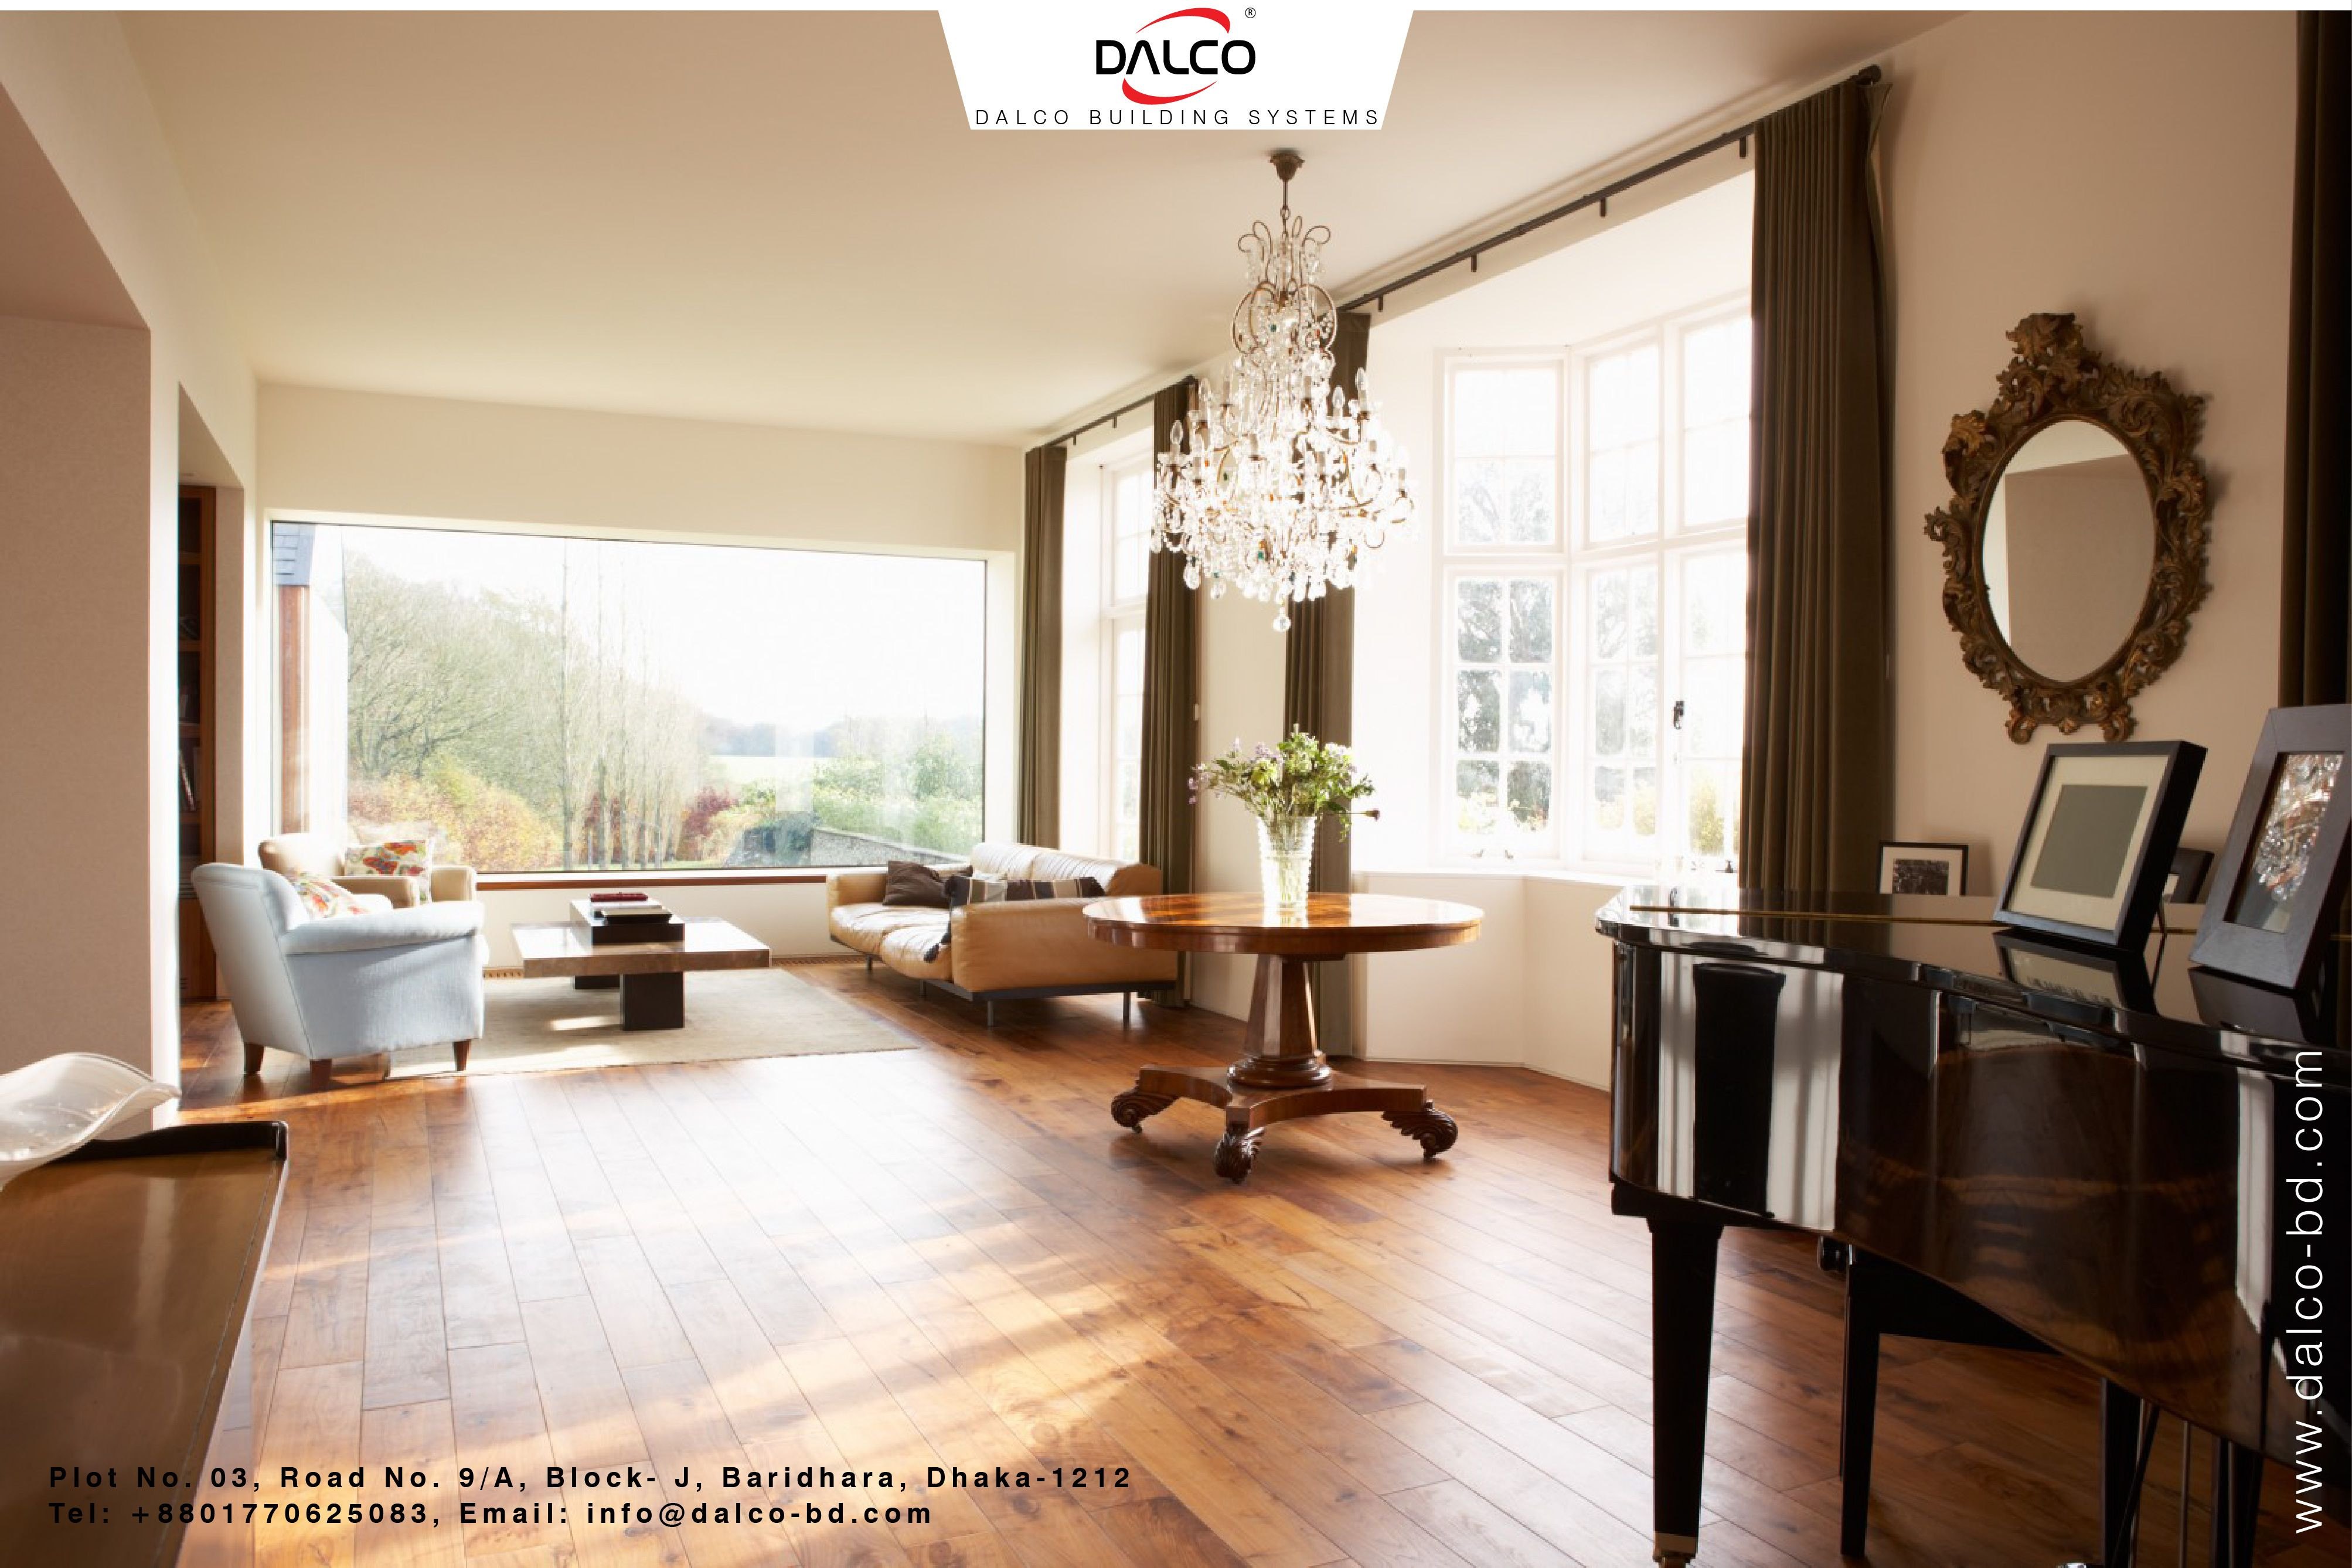 16 Ideal Bd Hardwood Floors 2024 free download bd hardwood floors of dalco bd dalcobd on pinterest within dee6ebe420988a87afee0a386b862919